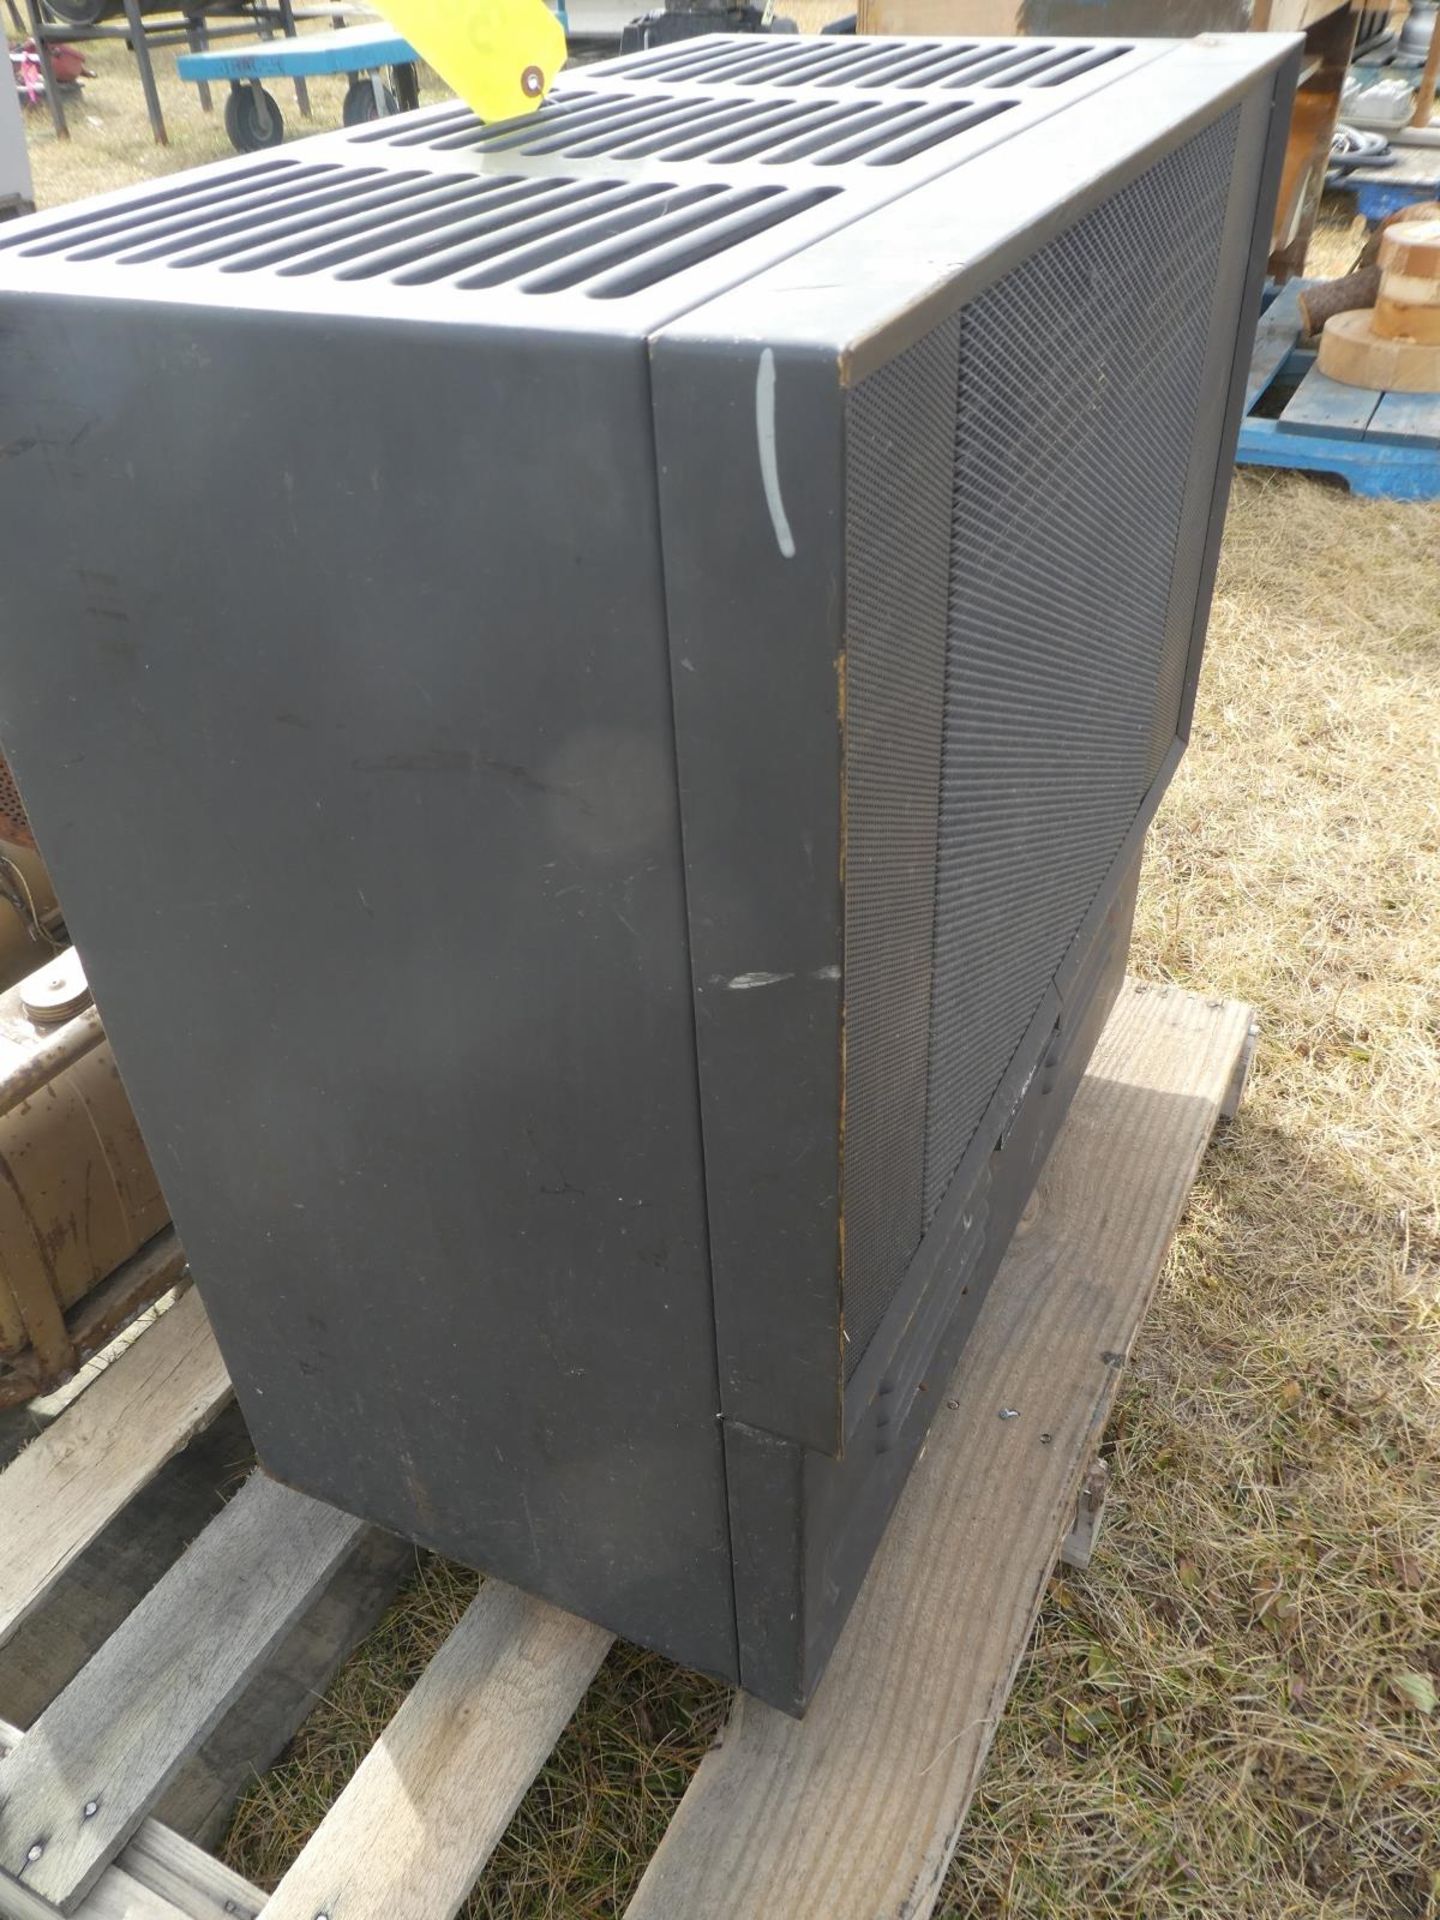 NATURAL GAS RADIANT HEATER 27"X15"X27" - Image 2 of 3